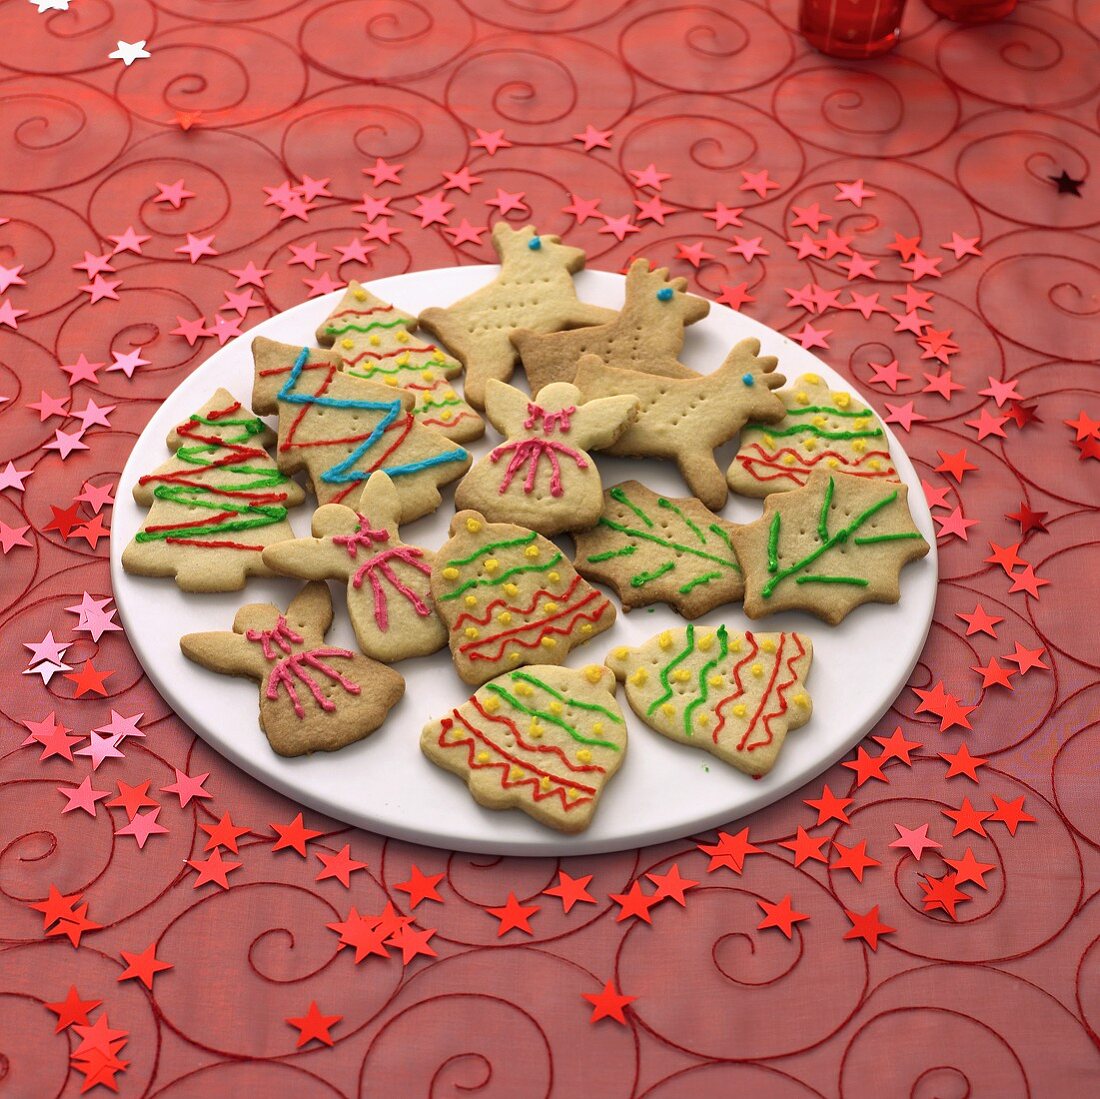 Decorated Christmas biscuits